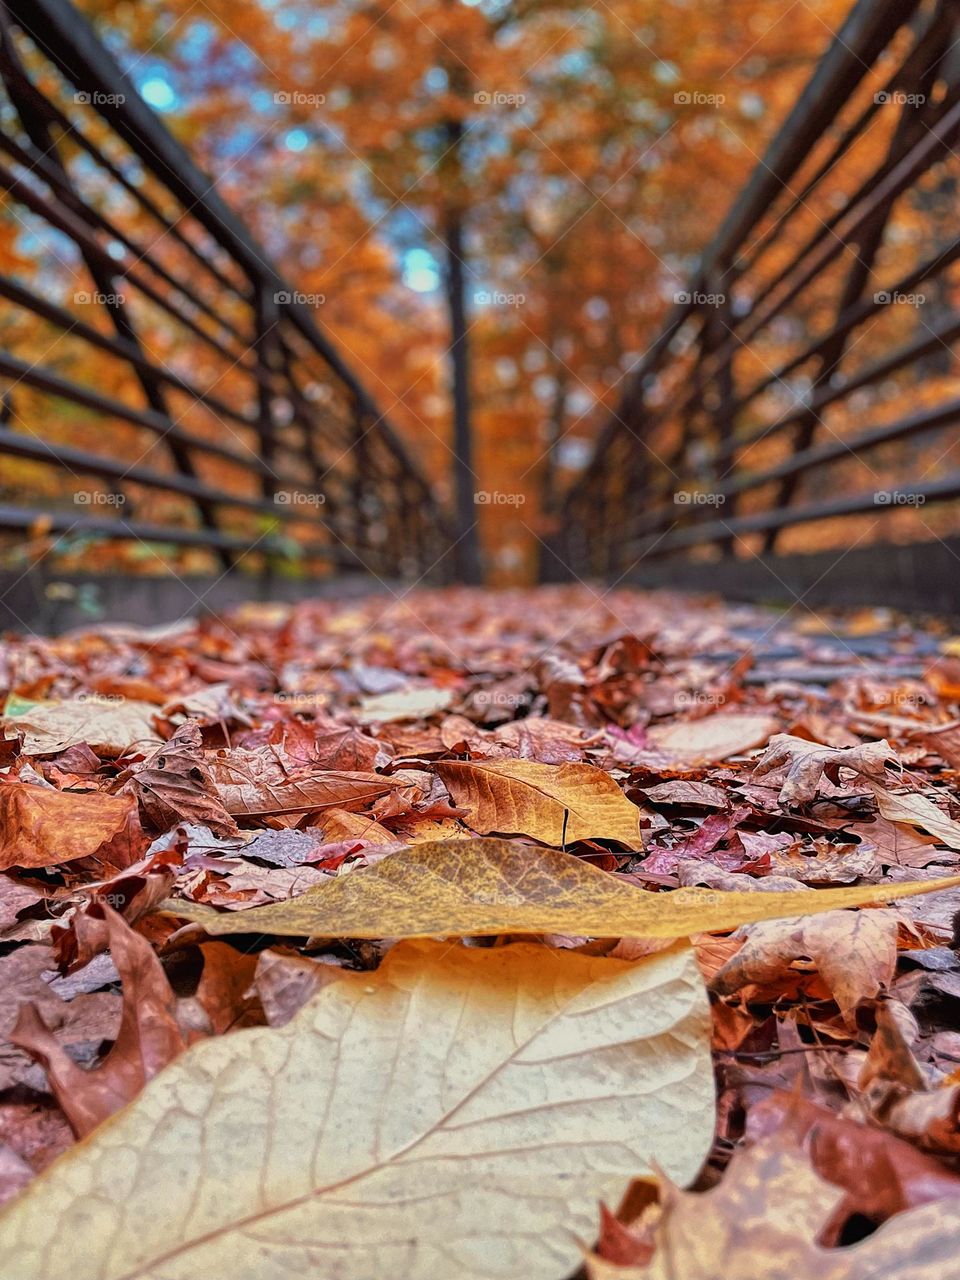 Fallen leaves from autumn trees cover a bridge, pathway to the forest, forest of trees, trees in the autumn, plants in the forest, leaves on the ground, plants in nature, falltime In Michigan, autumn in the MidWest 